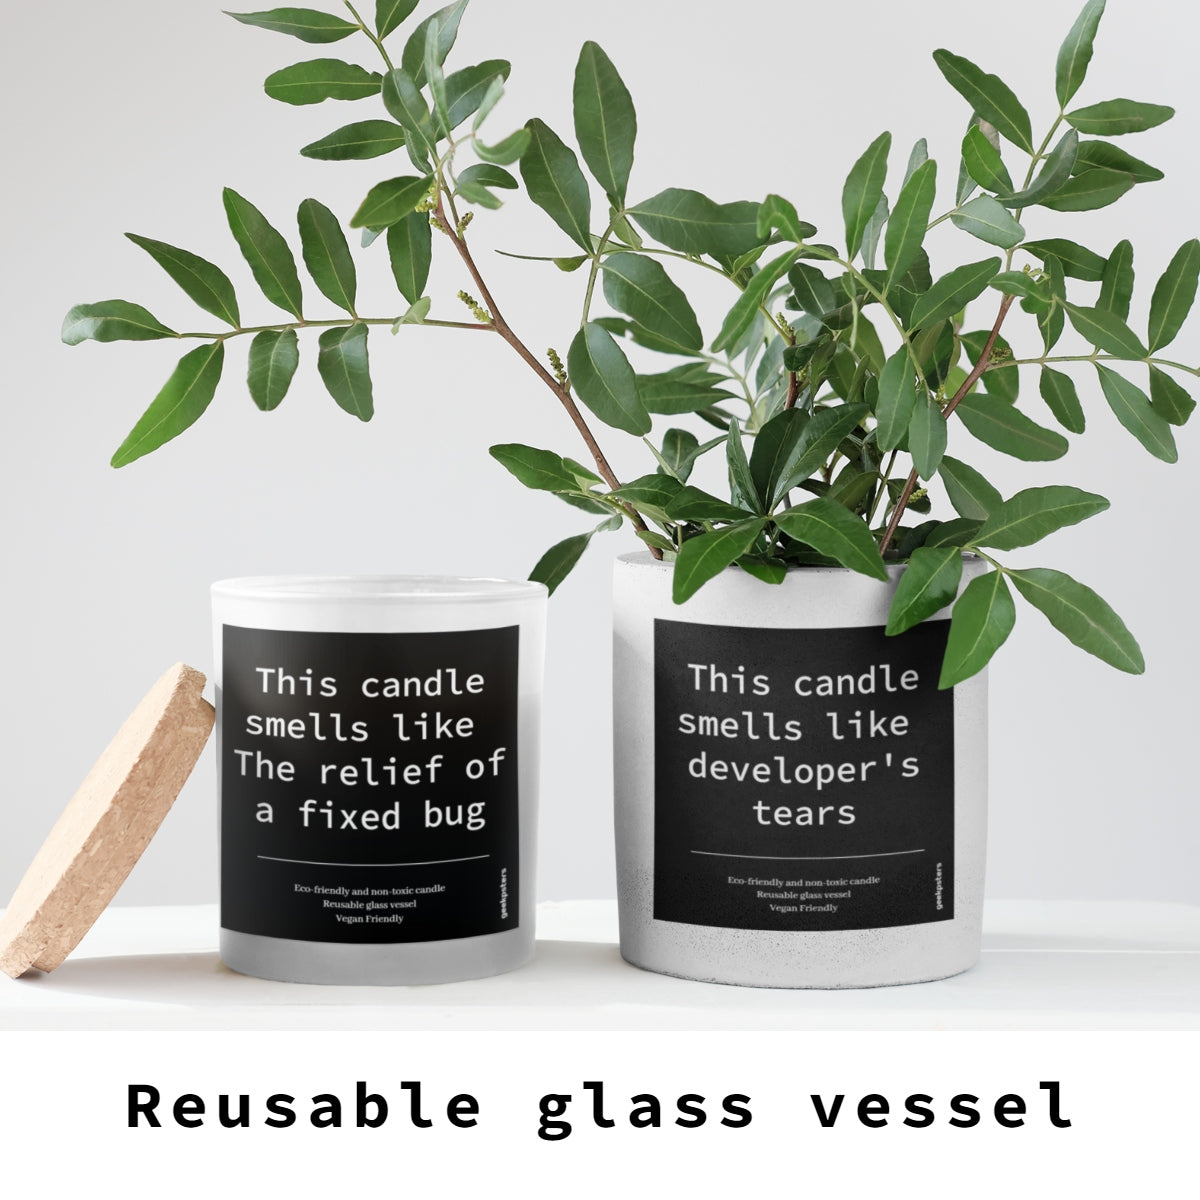 Two Container Candles in reusable glass vessels with humorous labels, one reading "smells like the relief of a fixed bug" and the other "smells like developer's tears," beside a green plant.